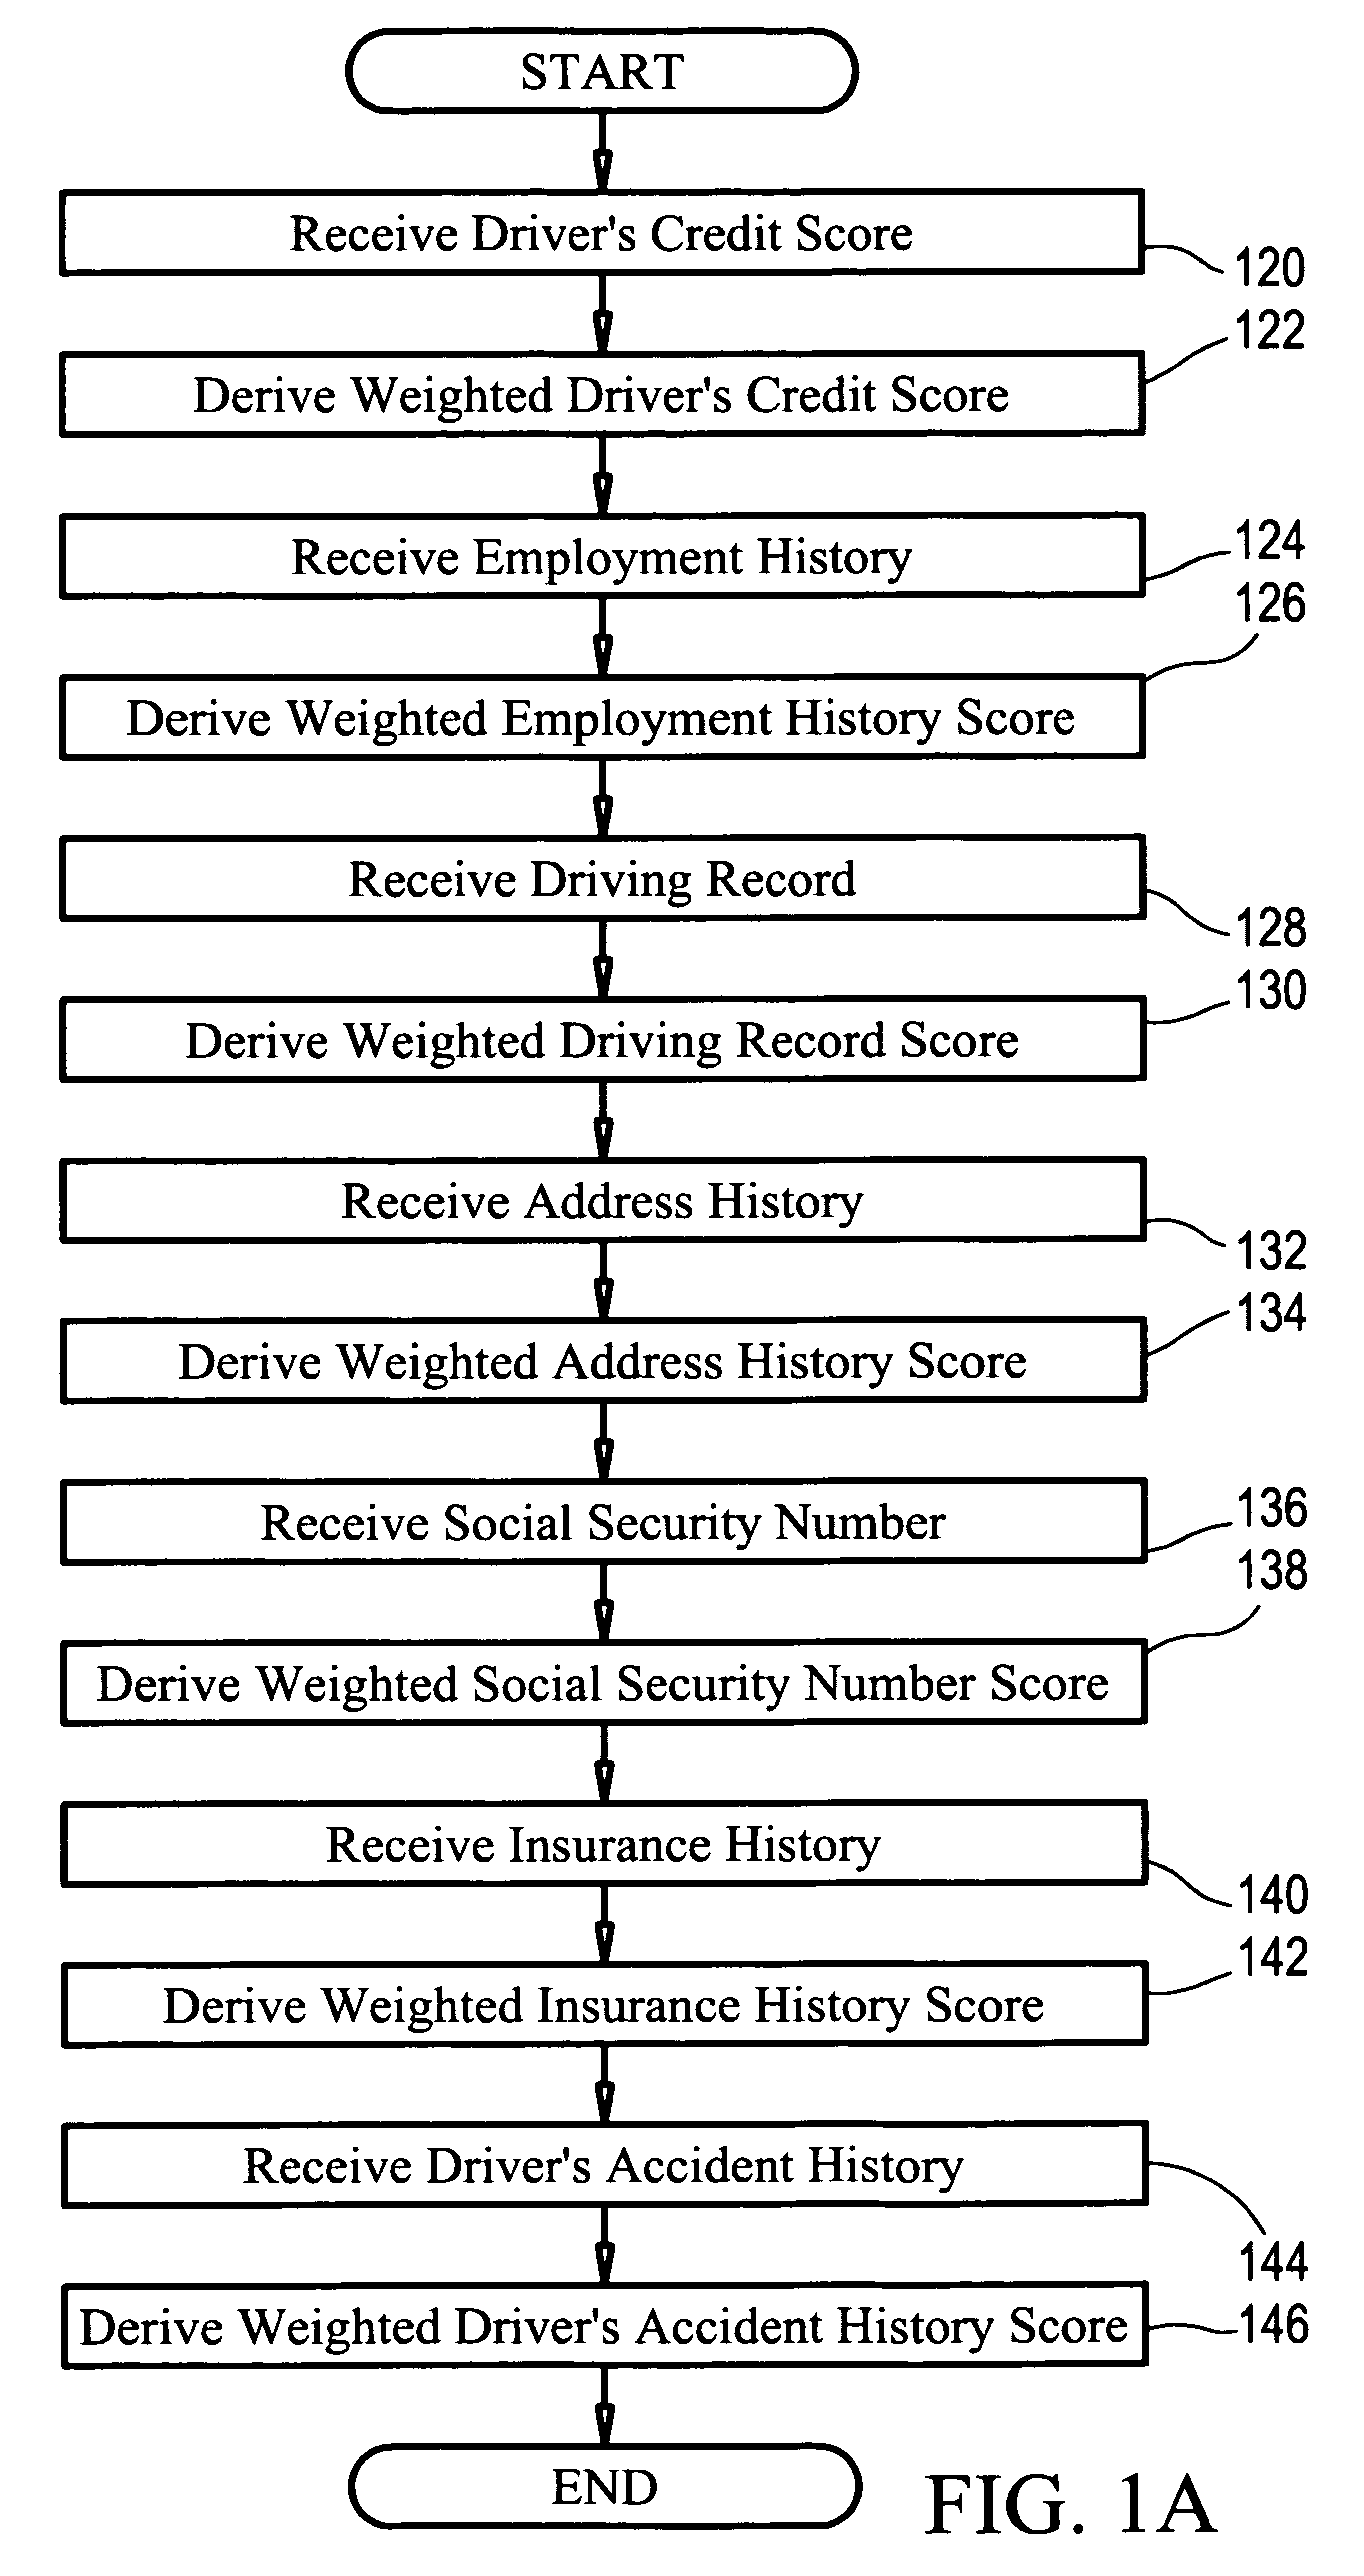 System and method for determining an objective driver score